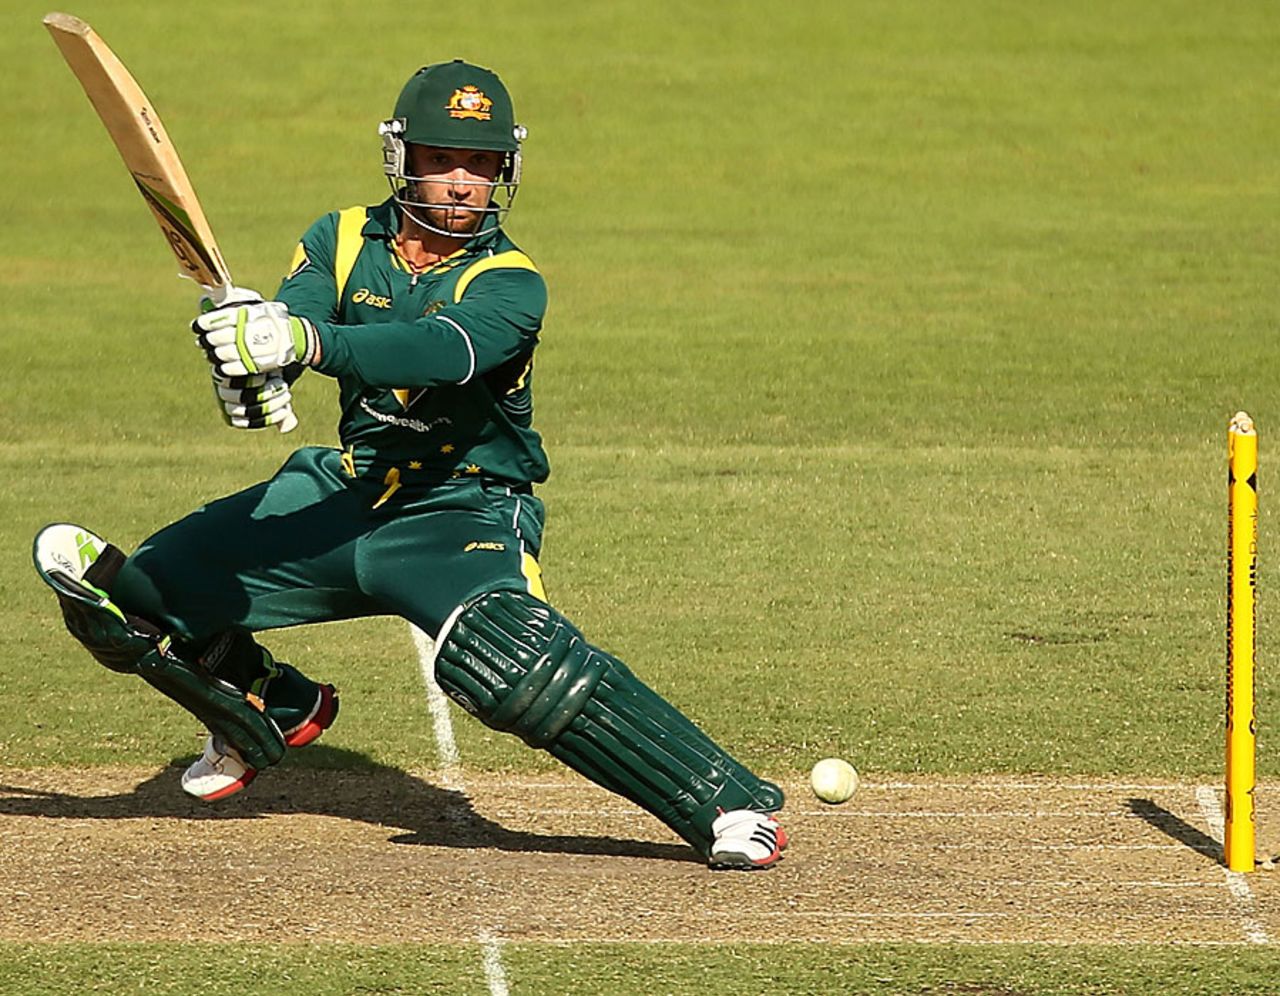 Phillip Hughes cuts during his innings of 86, Australia v West Indies, 3rd ODI, Canberra, February 6, 2013